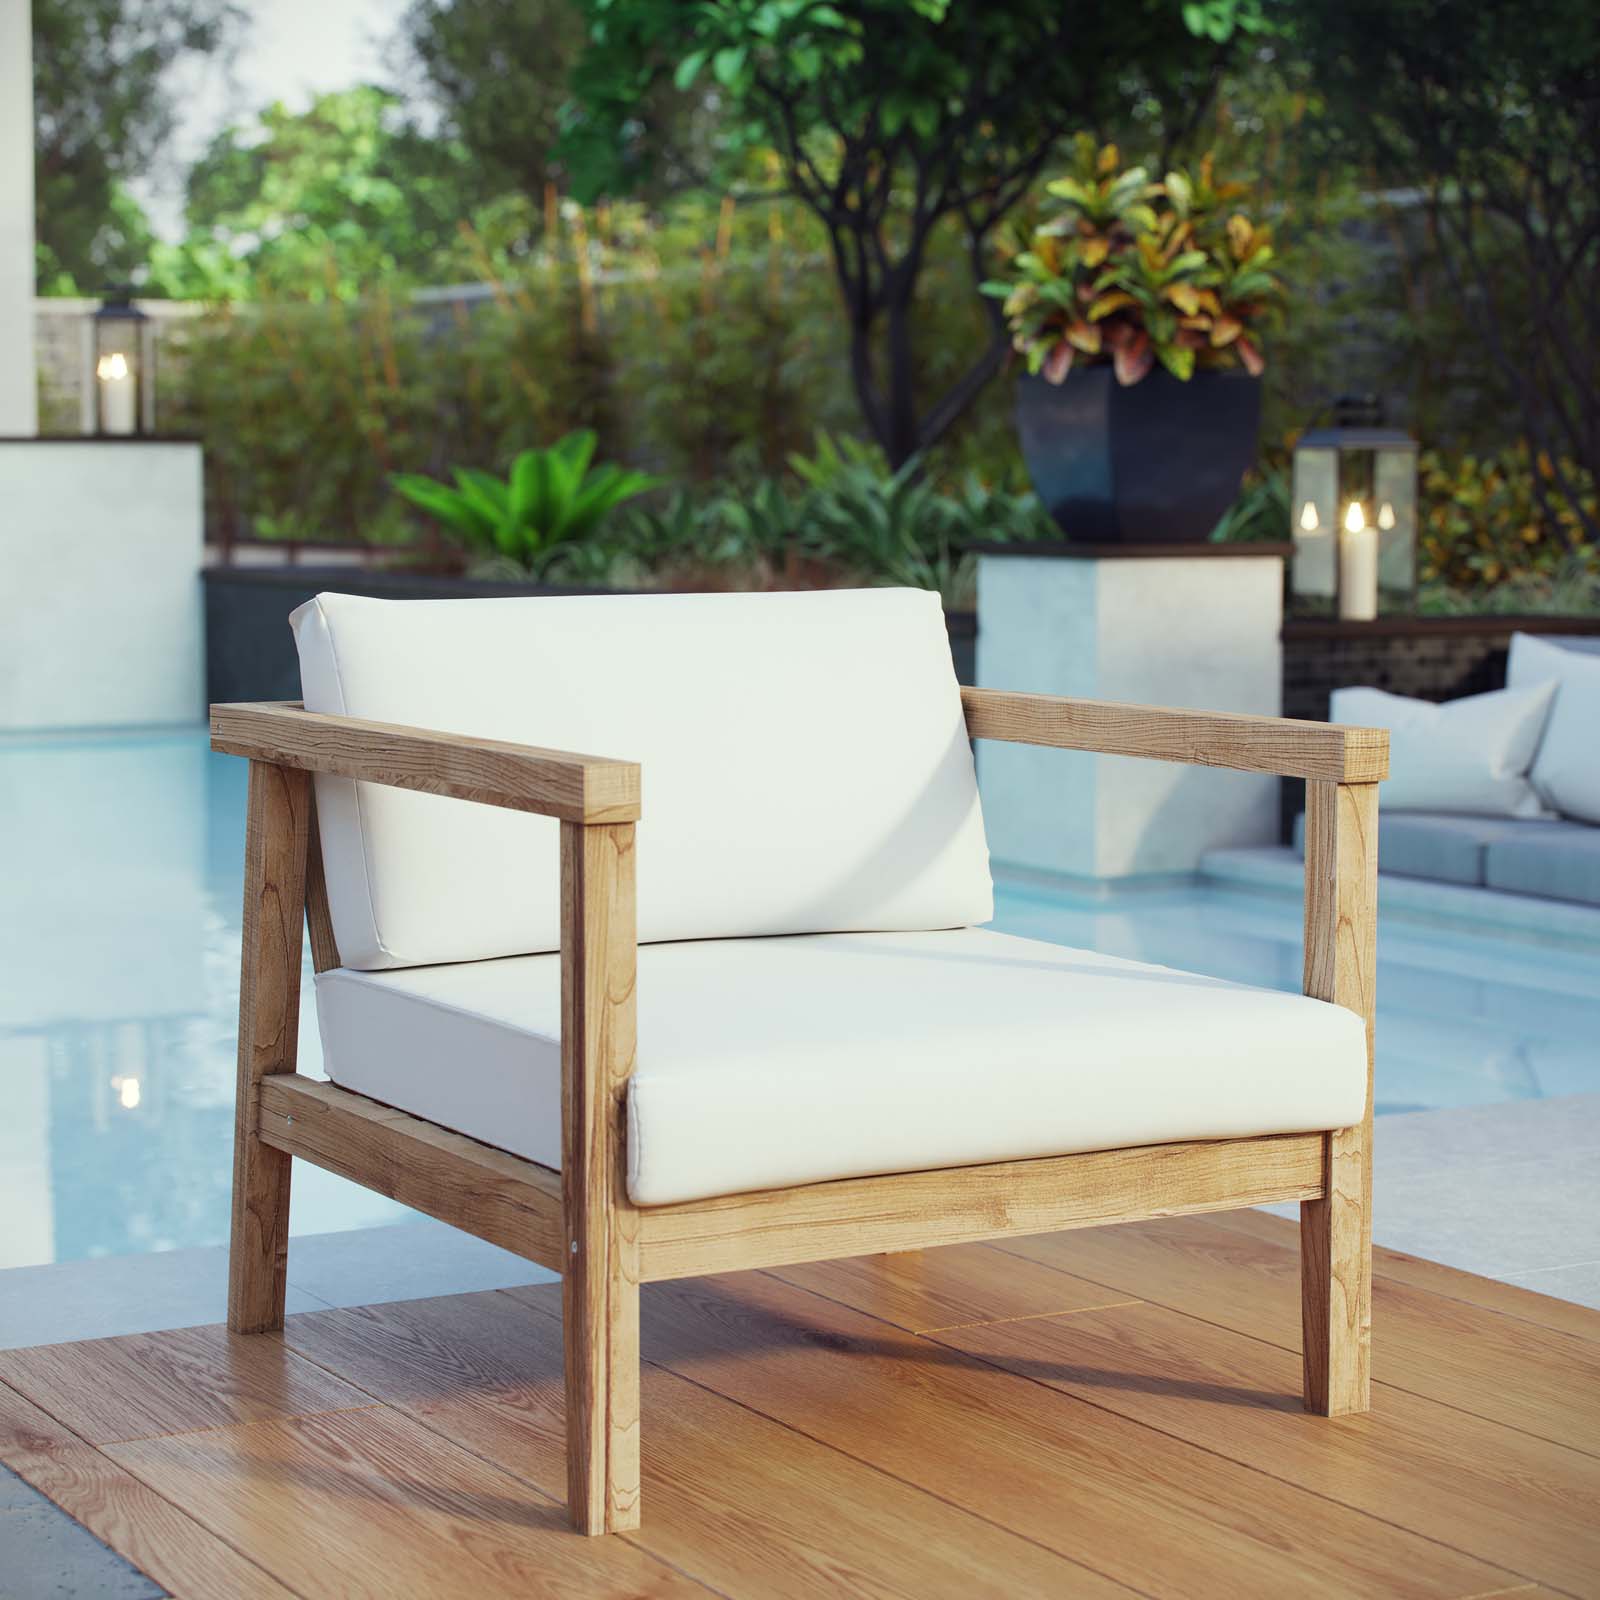 Modway Bayport Outdoor Patio Teak Armchair in Natural White - image 2 of 6